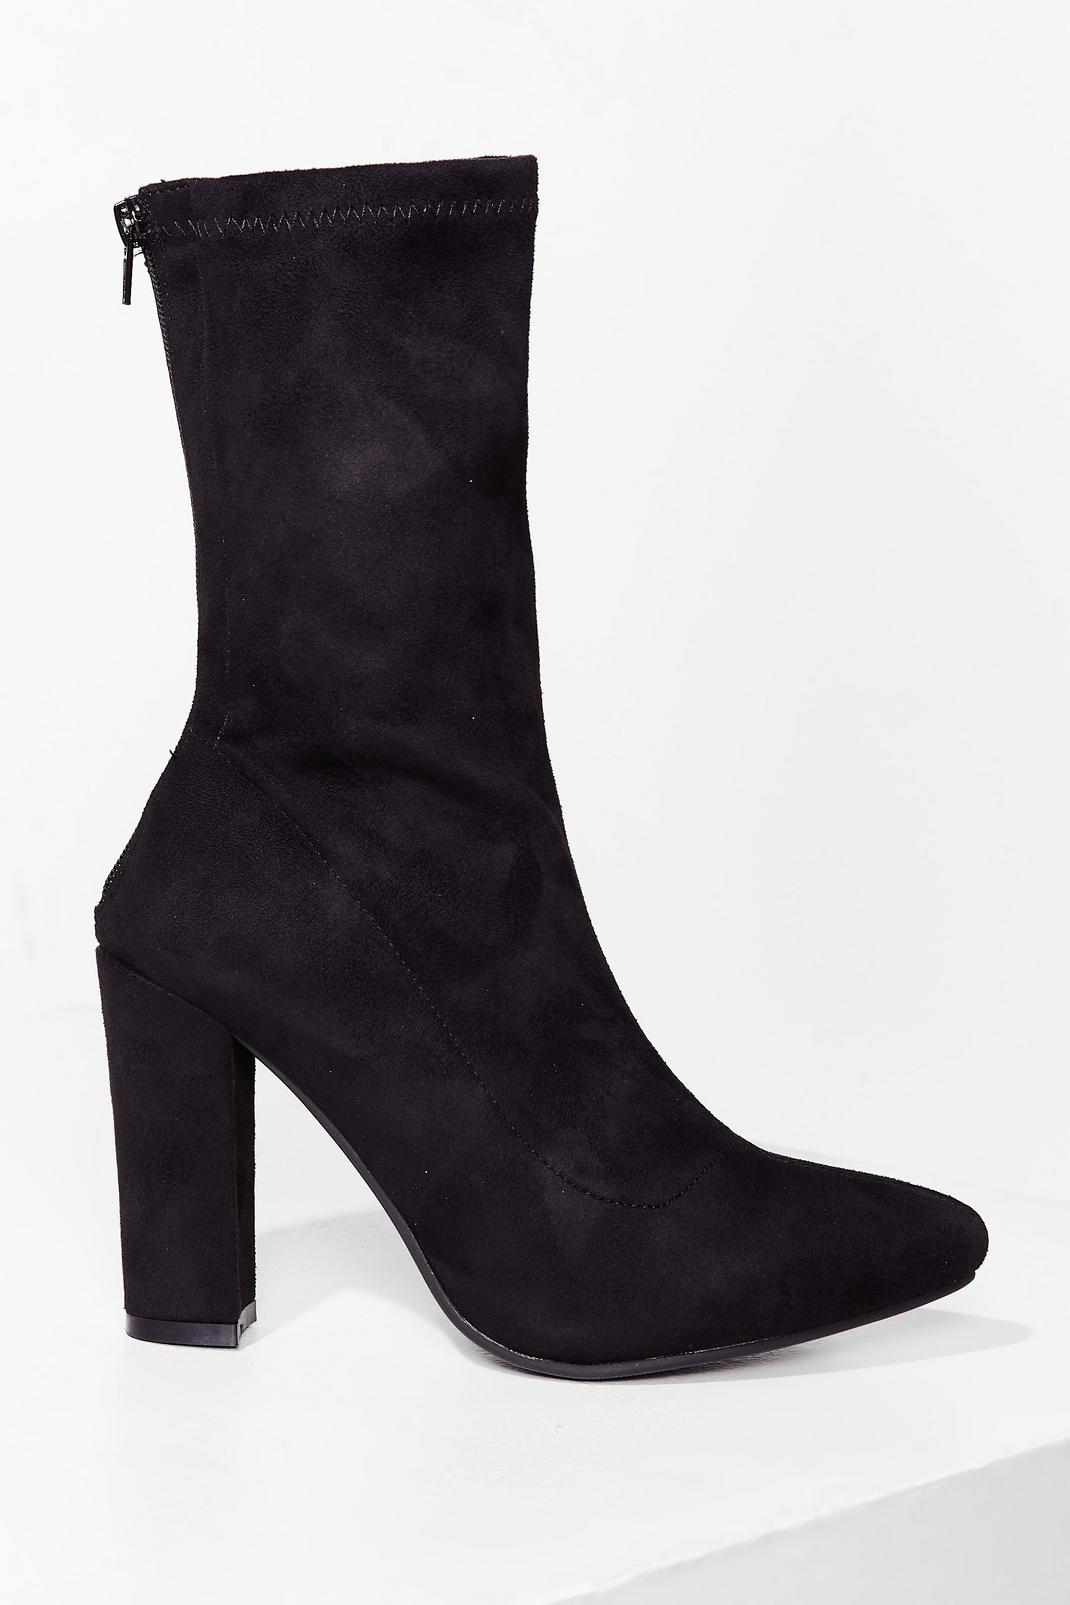 Sock It to 'Em Faux Suede Heeled Boots image number 1